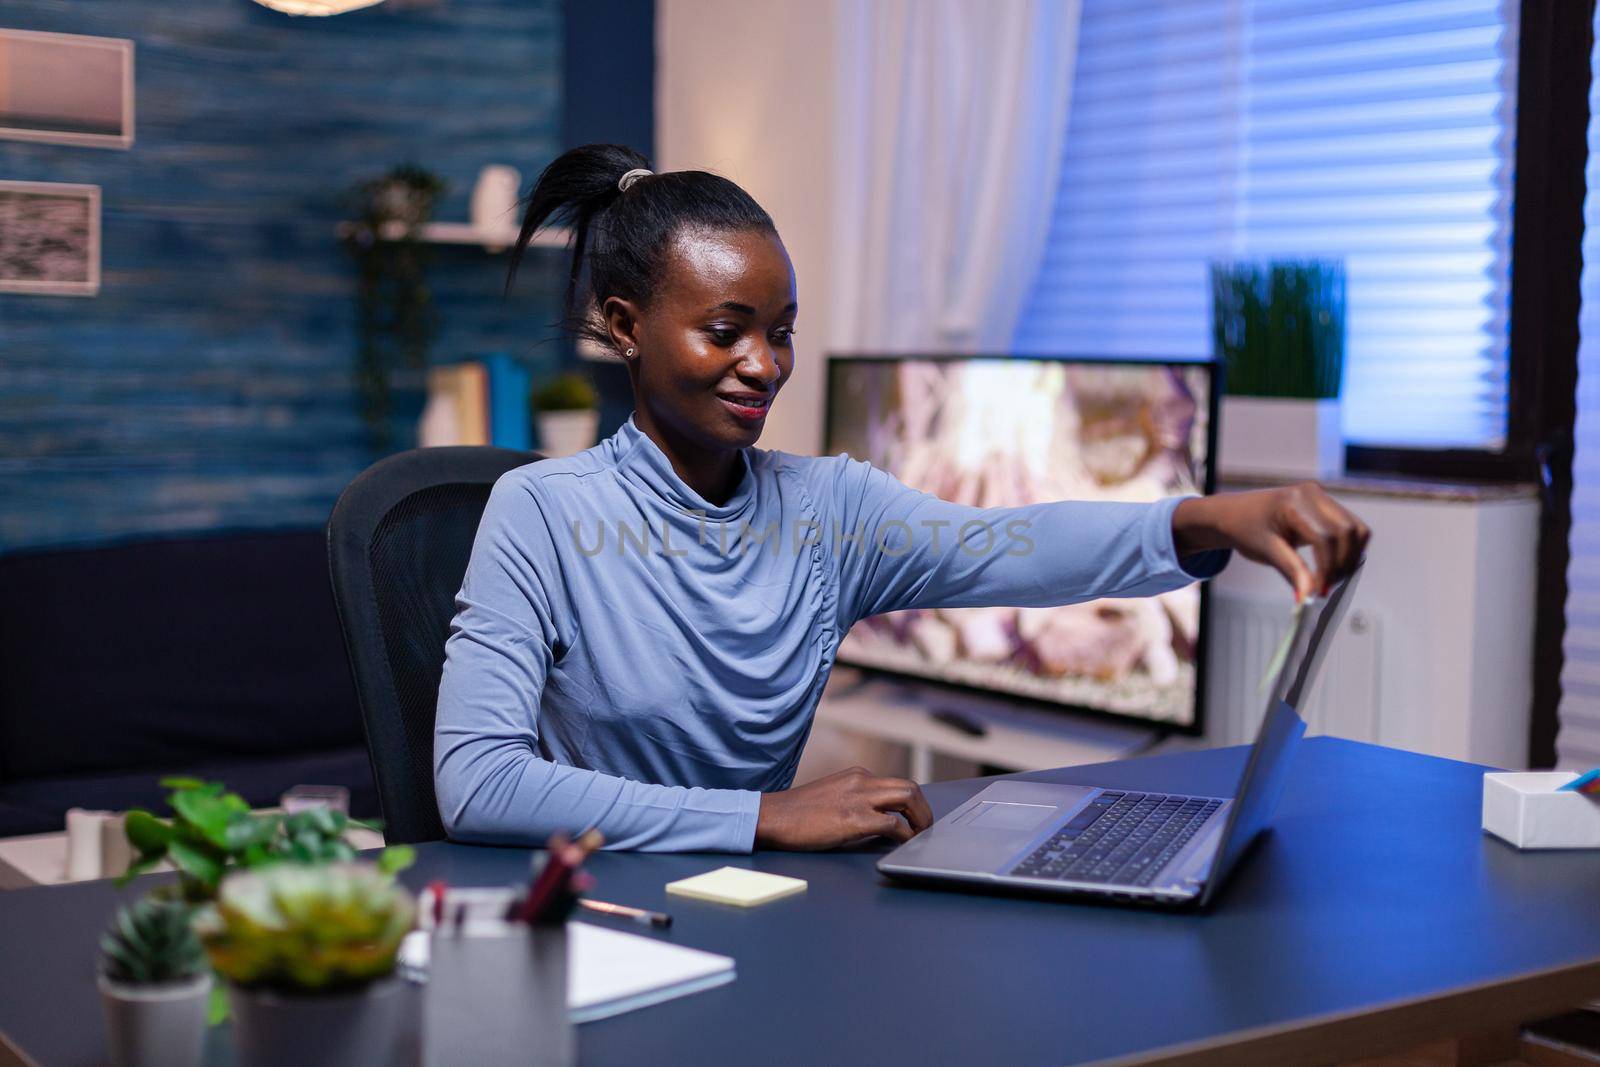 African business woman smiling at webcam during conference call in the evening sitting at desk. Black entrepreneur sitting in personal workplace writing on keyboard.